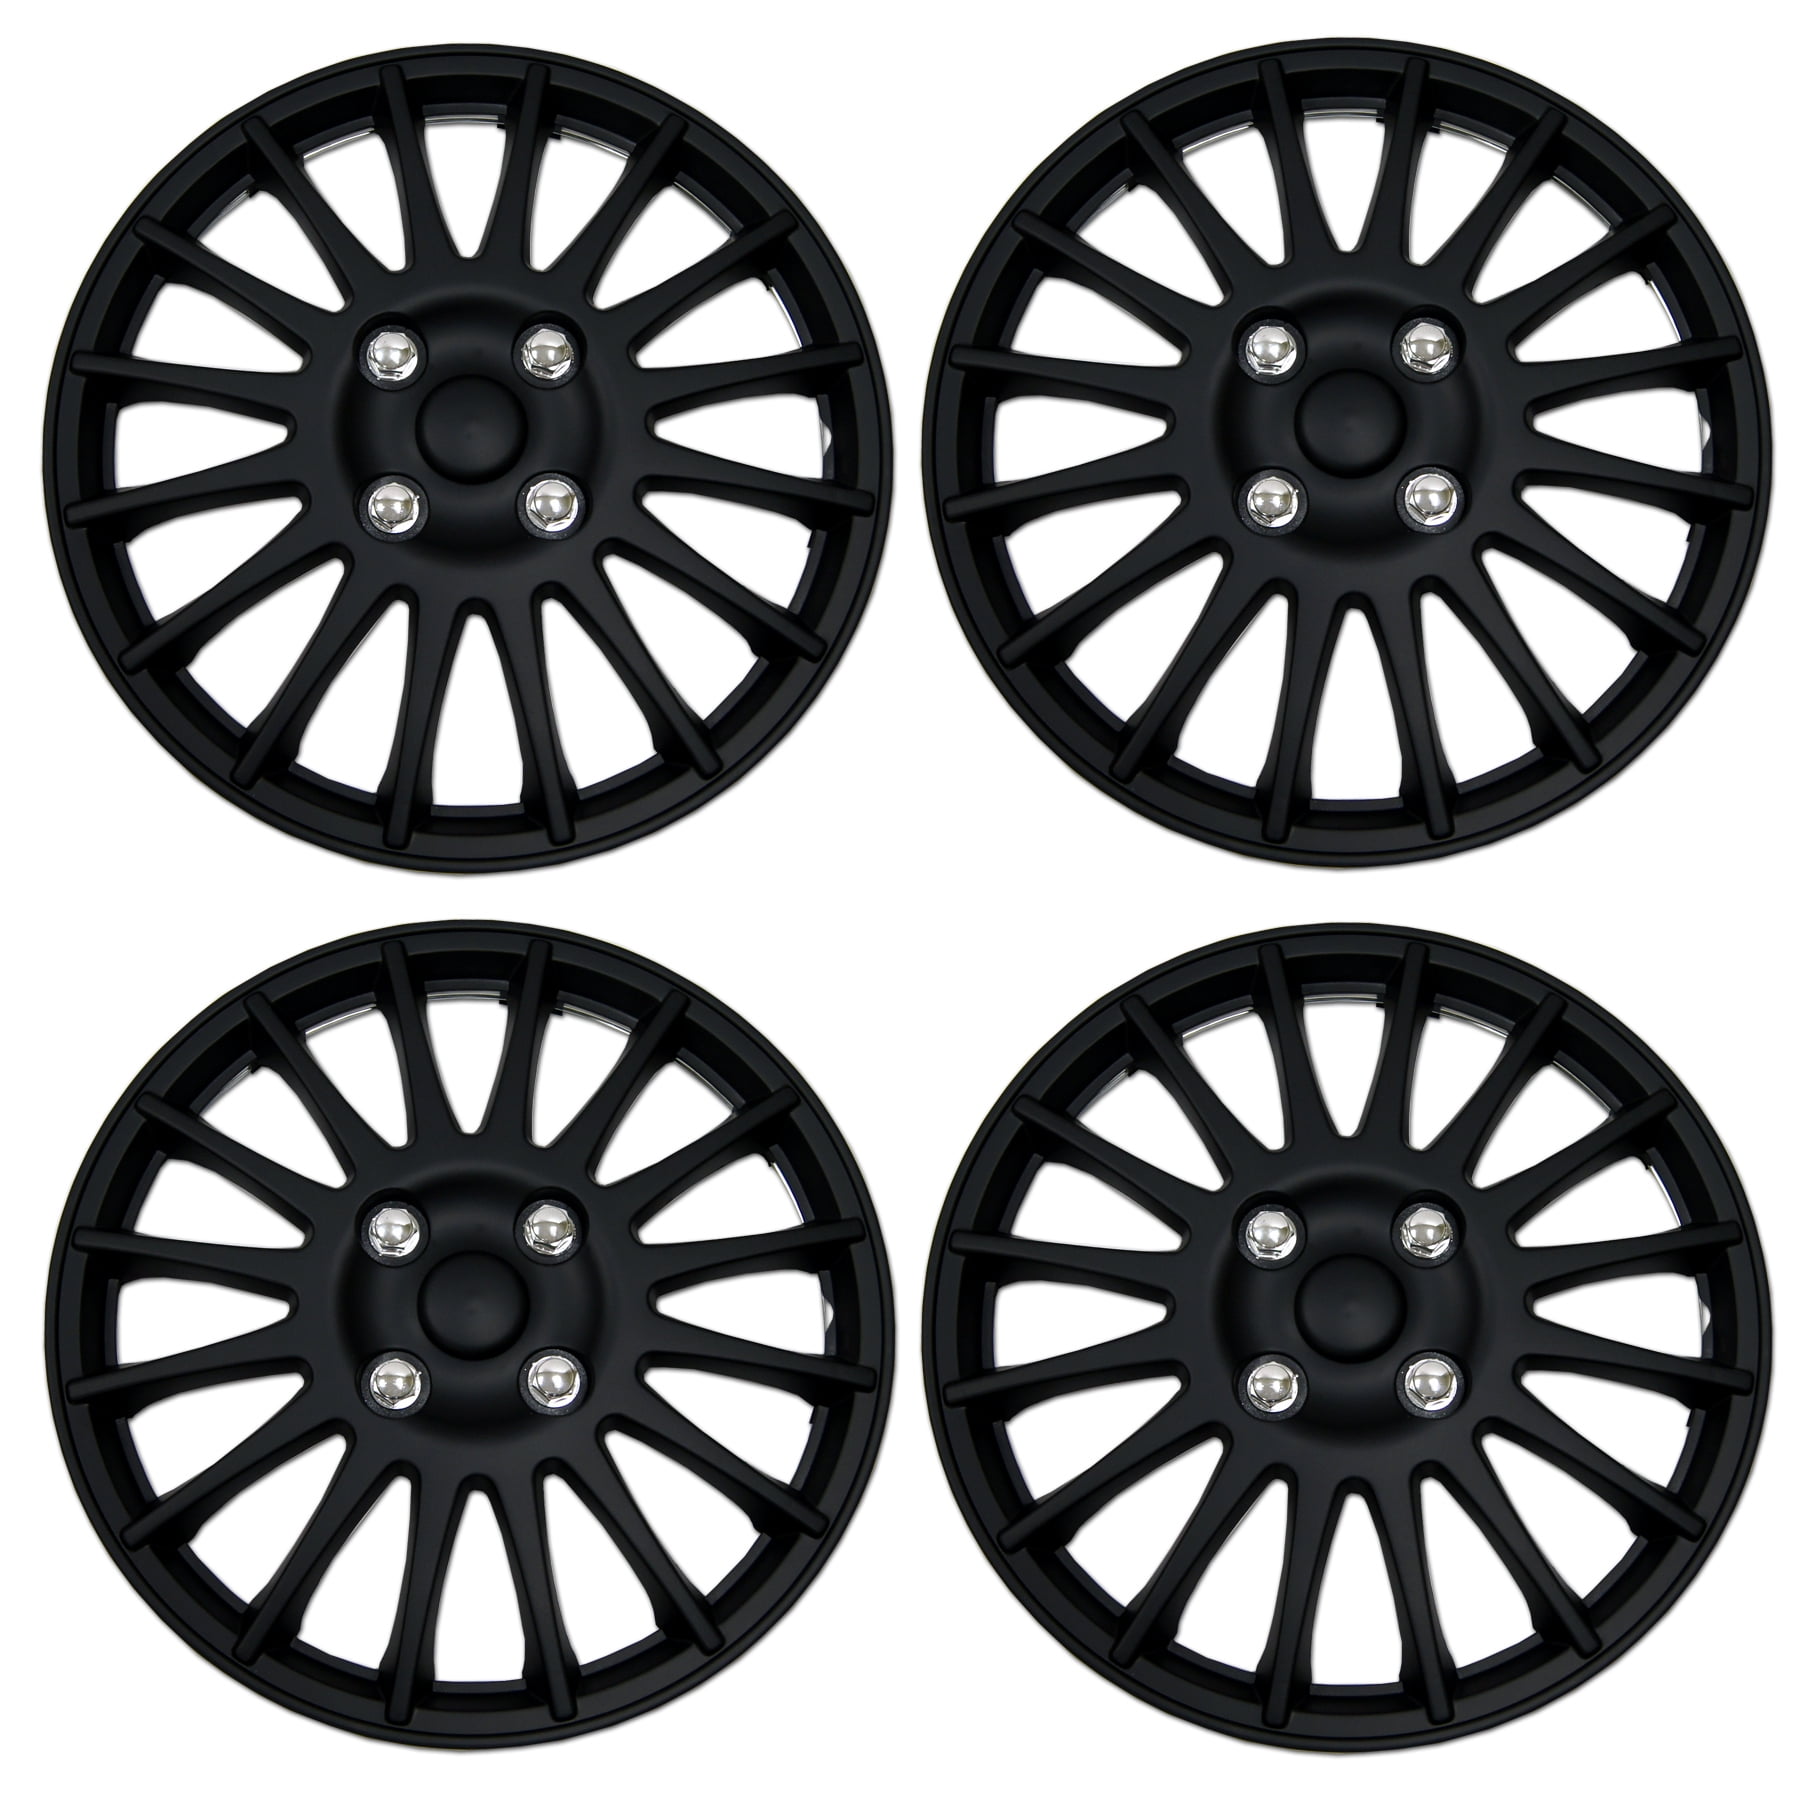 TuningPros WSC3-007B15 4pcs Set Snap-On Type Pop-On 15-Inches Matte Black Hubcaps Wheel Cover 